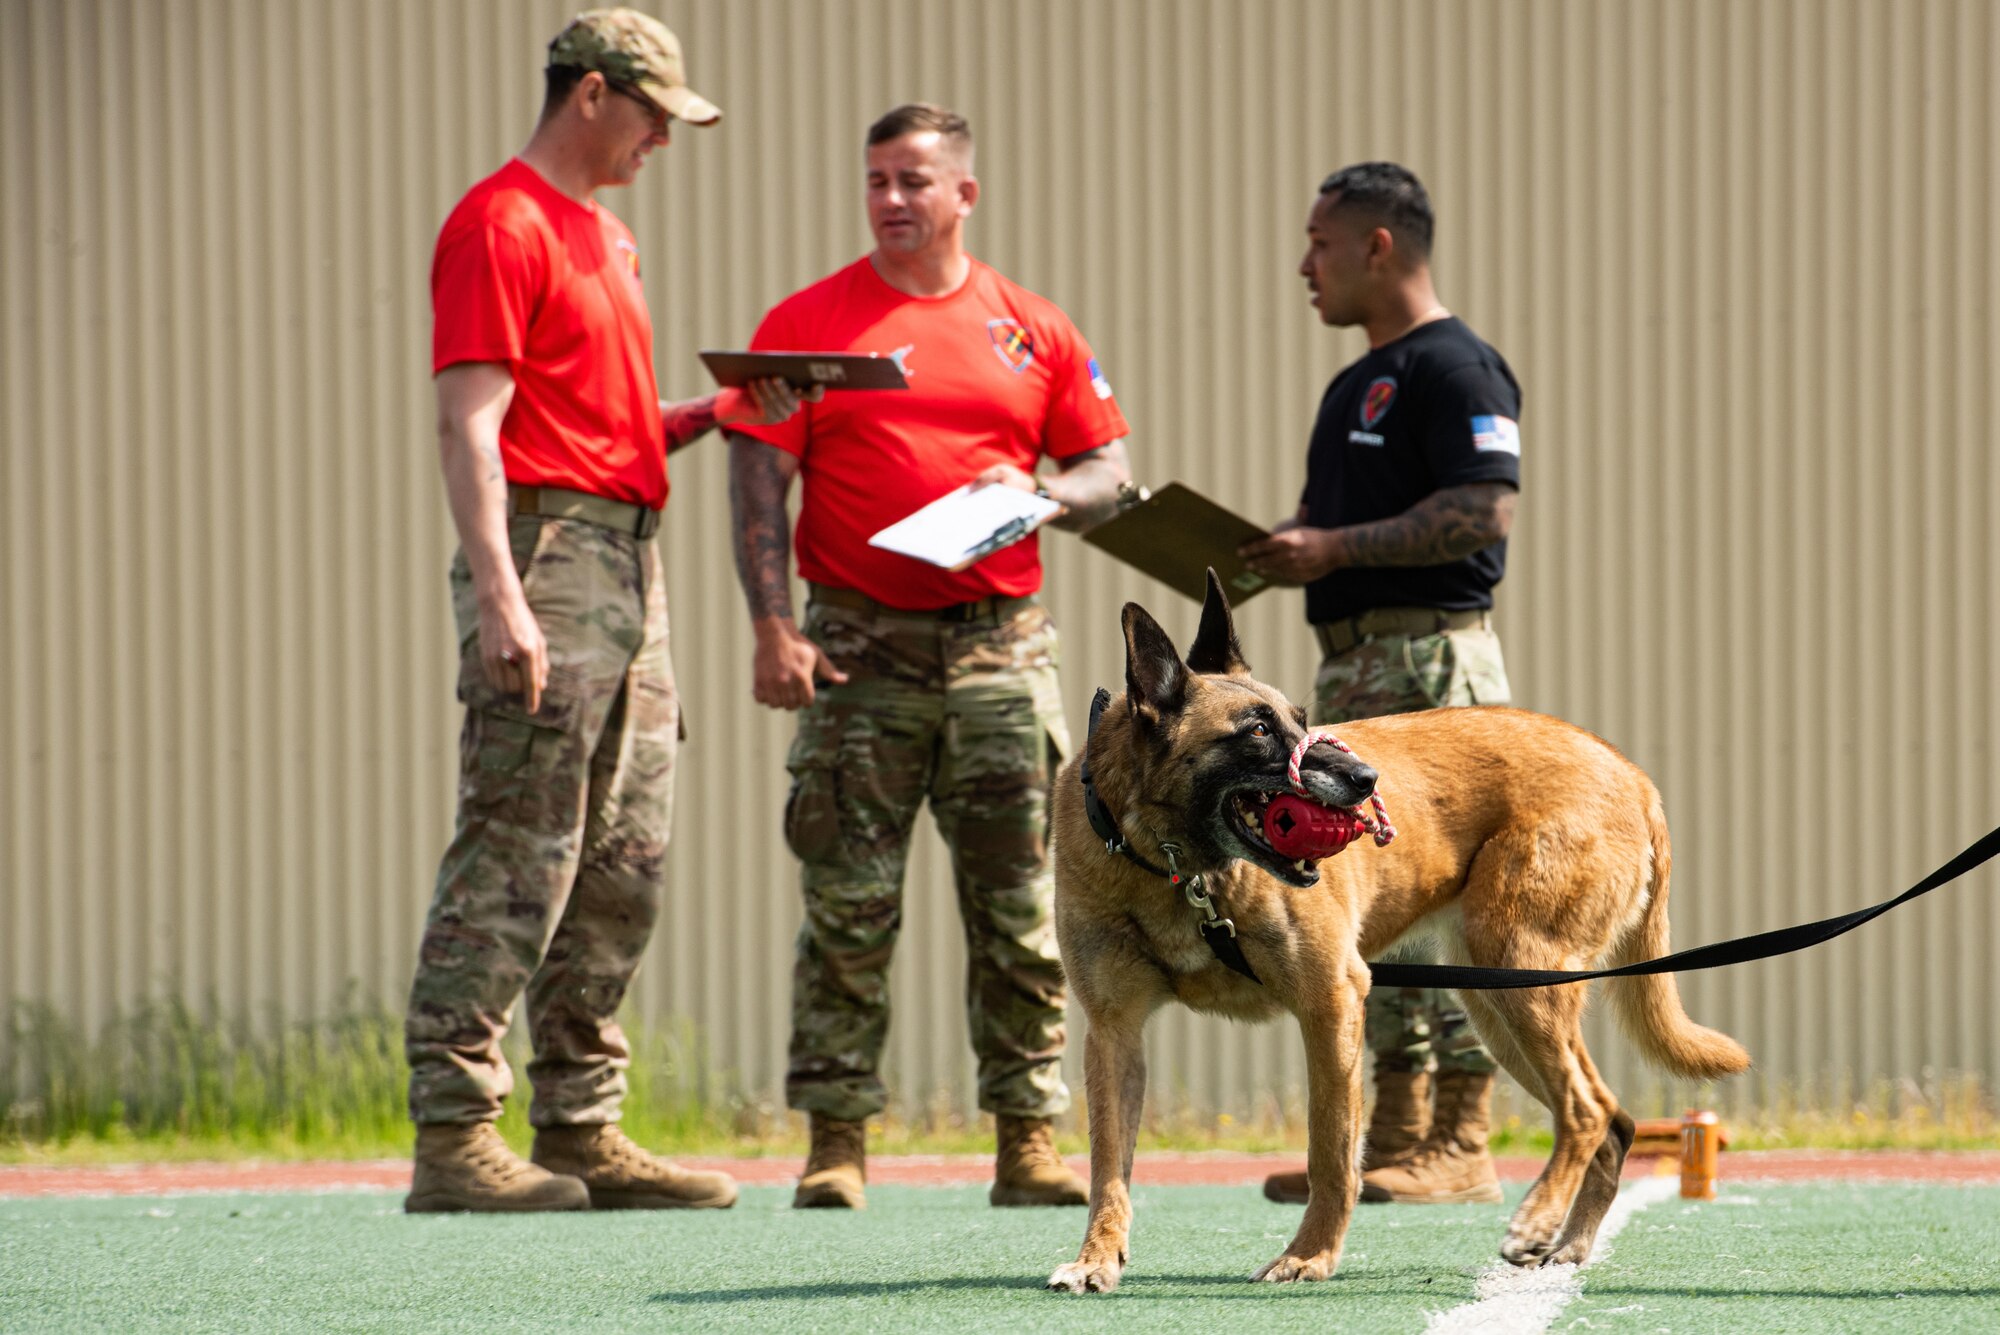 Judges deliberate scores of the military working dogs